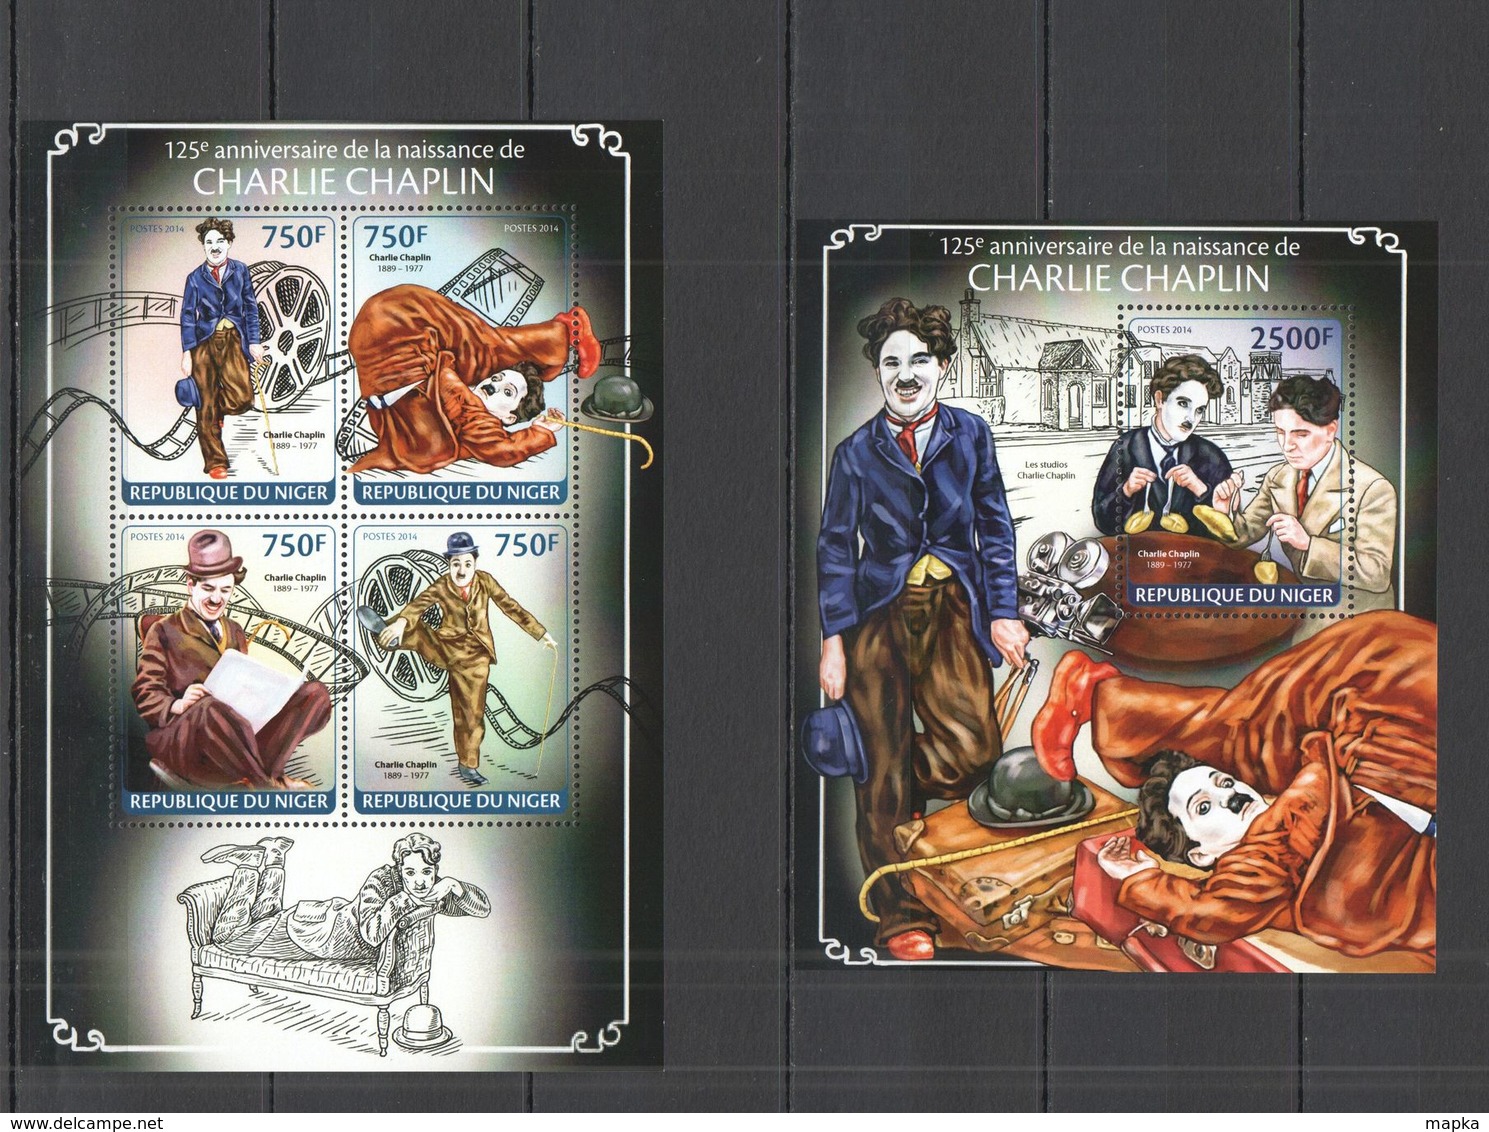 ST2685 2014 NIGER FAMOUS PEOPLE 125TH ANNIVERSARY CHARLIE CHAPLIN KB+BL MNH - Acteurs